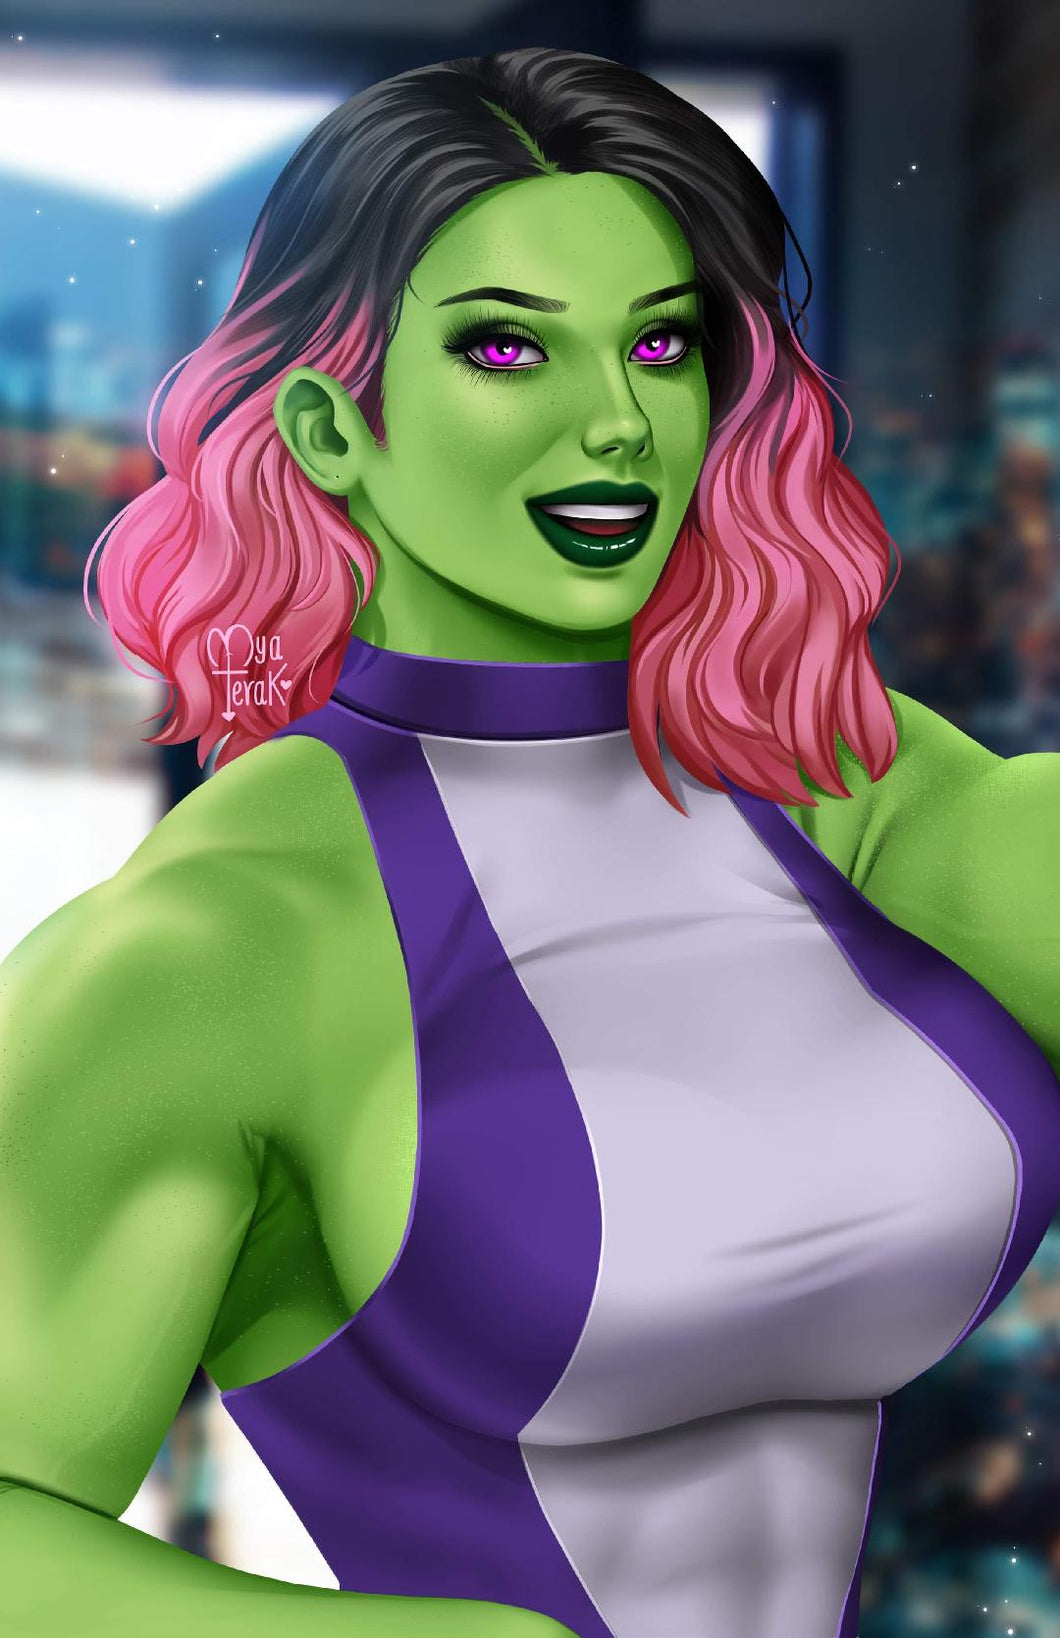 Totally Rad Life of Violet #1 She-Hulk Cosplay Nice & Naughty 2 Book Variant Cover Set by Myaterak BooKooComix Exclusive Editions Limited to 50